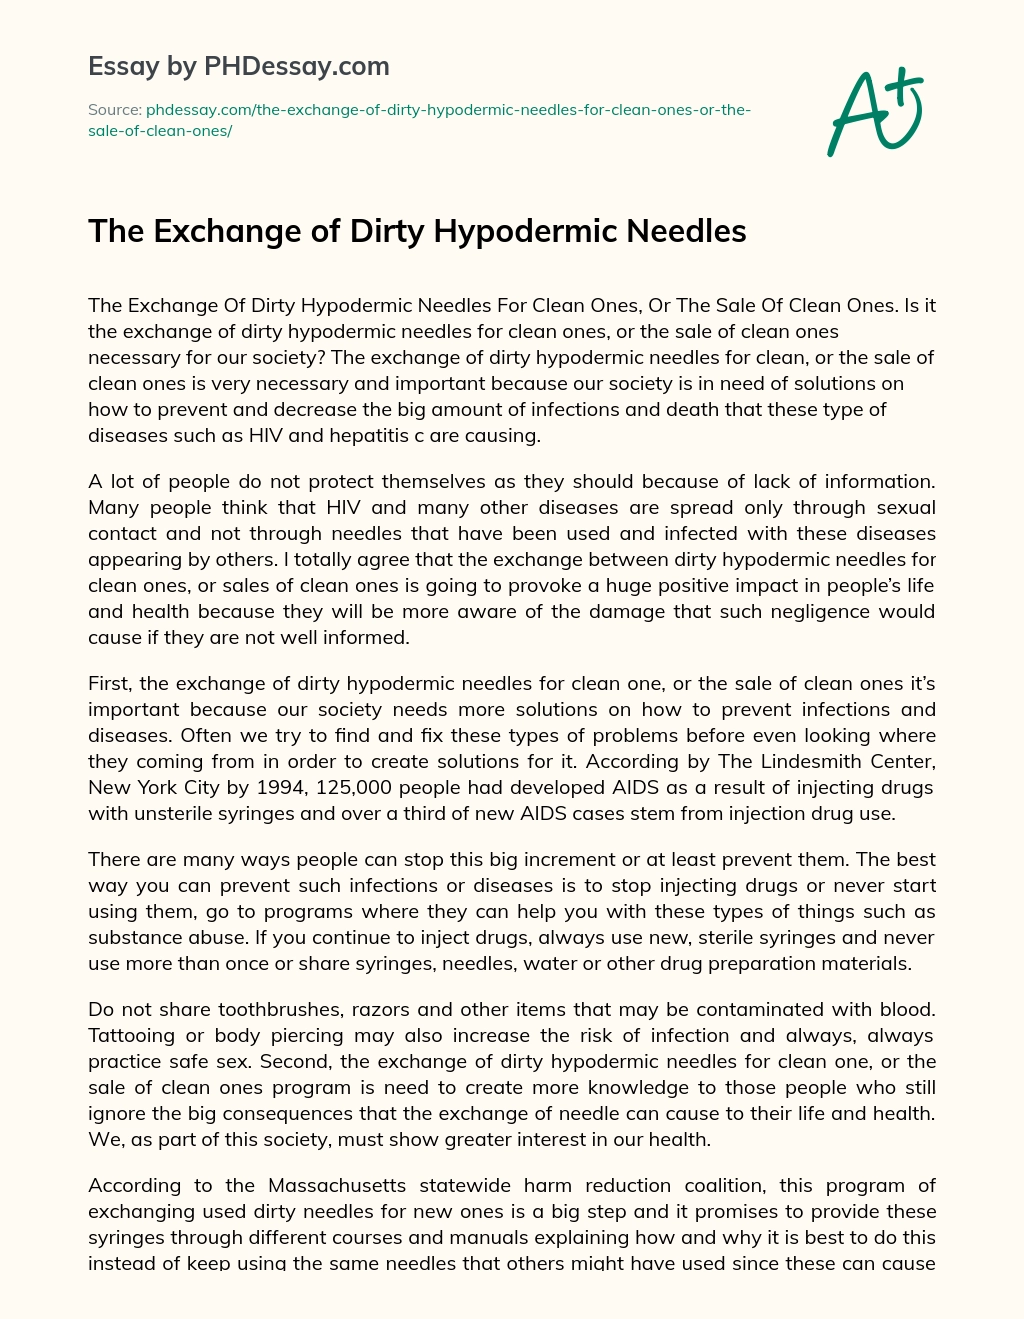 The Exchange of Dirty Hypodermic Needles essay